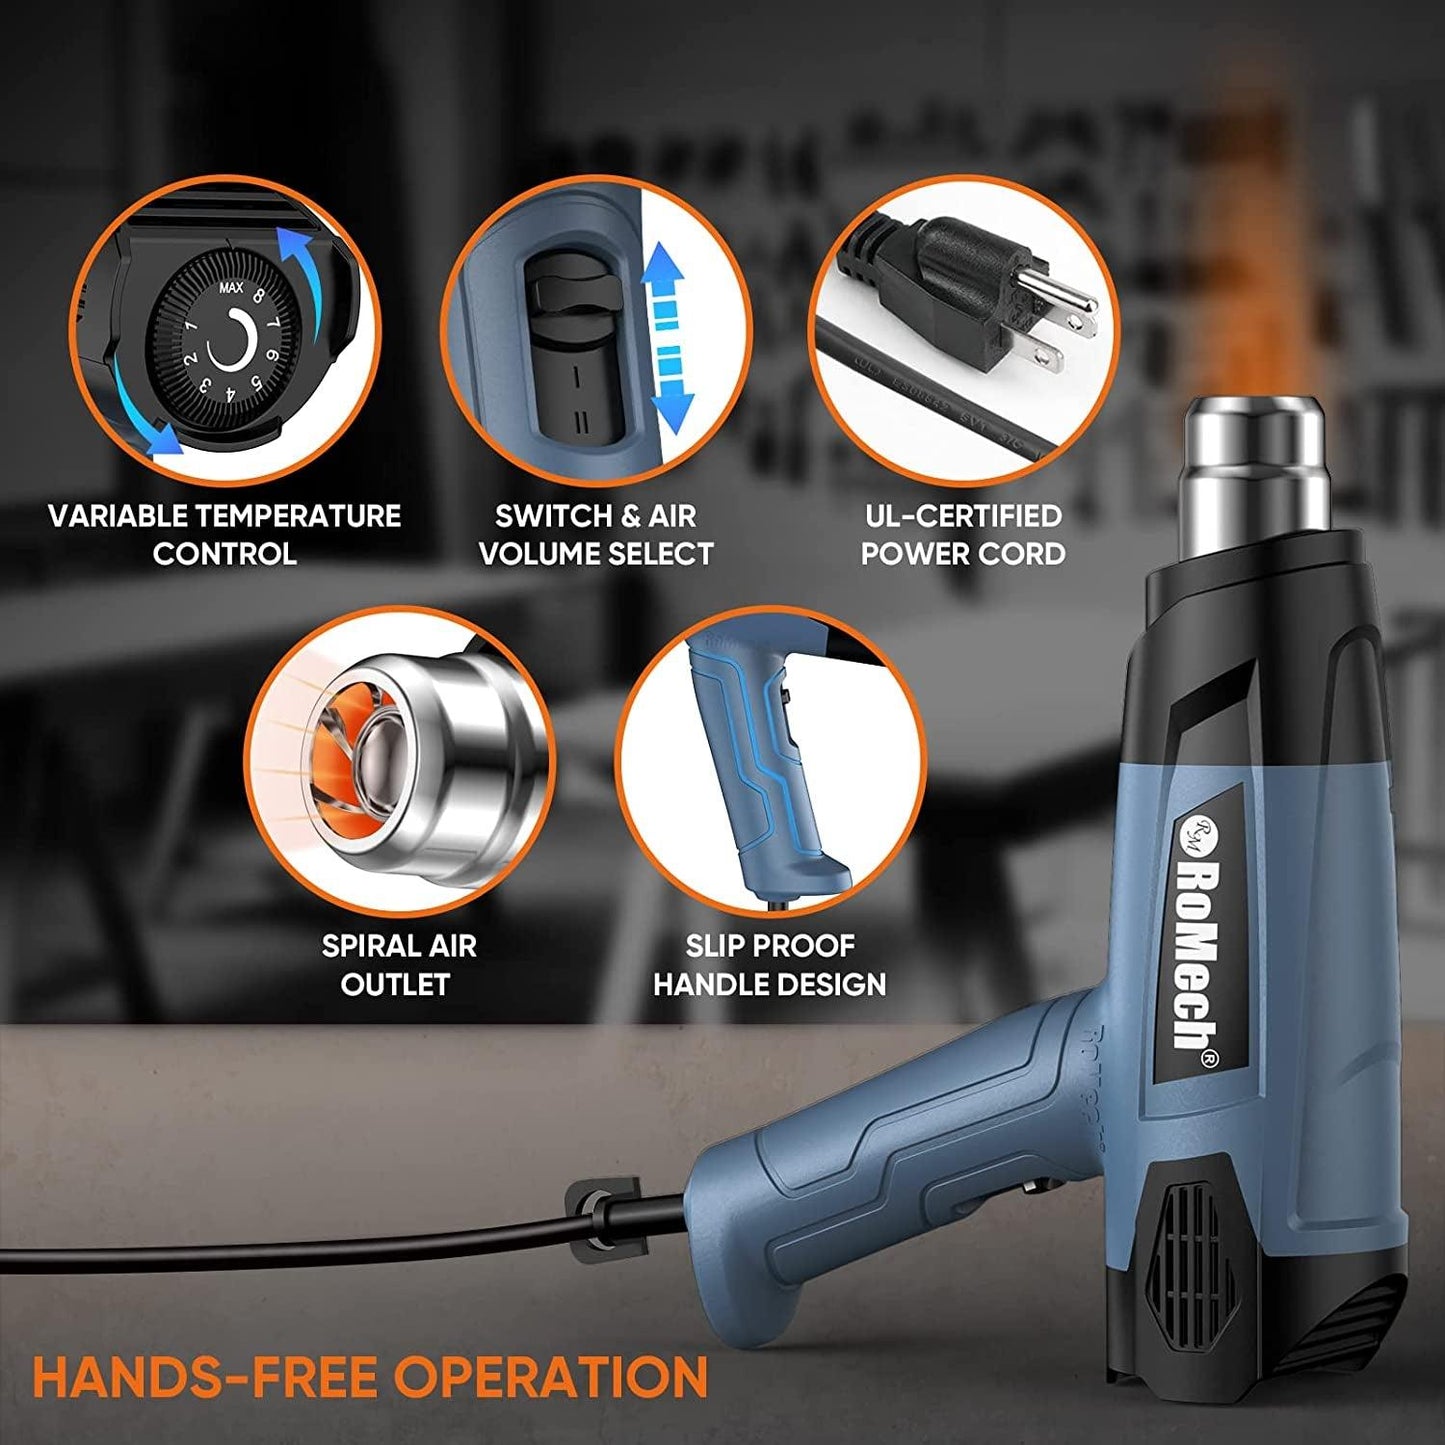 Heat Gun 1500W Variable Temperature Control with 2 Air Volume Setting Heavy Duty Hot Air Gun Kit 120°F~1200°F (50°C~650°C) with 4 Nozzles for Crafts Shrink Wrap (Blue) - WoodArtSupply